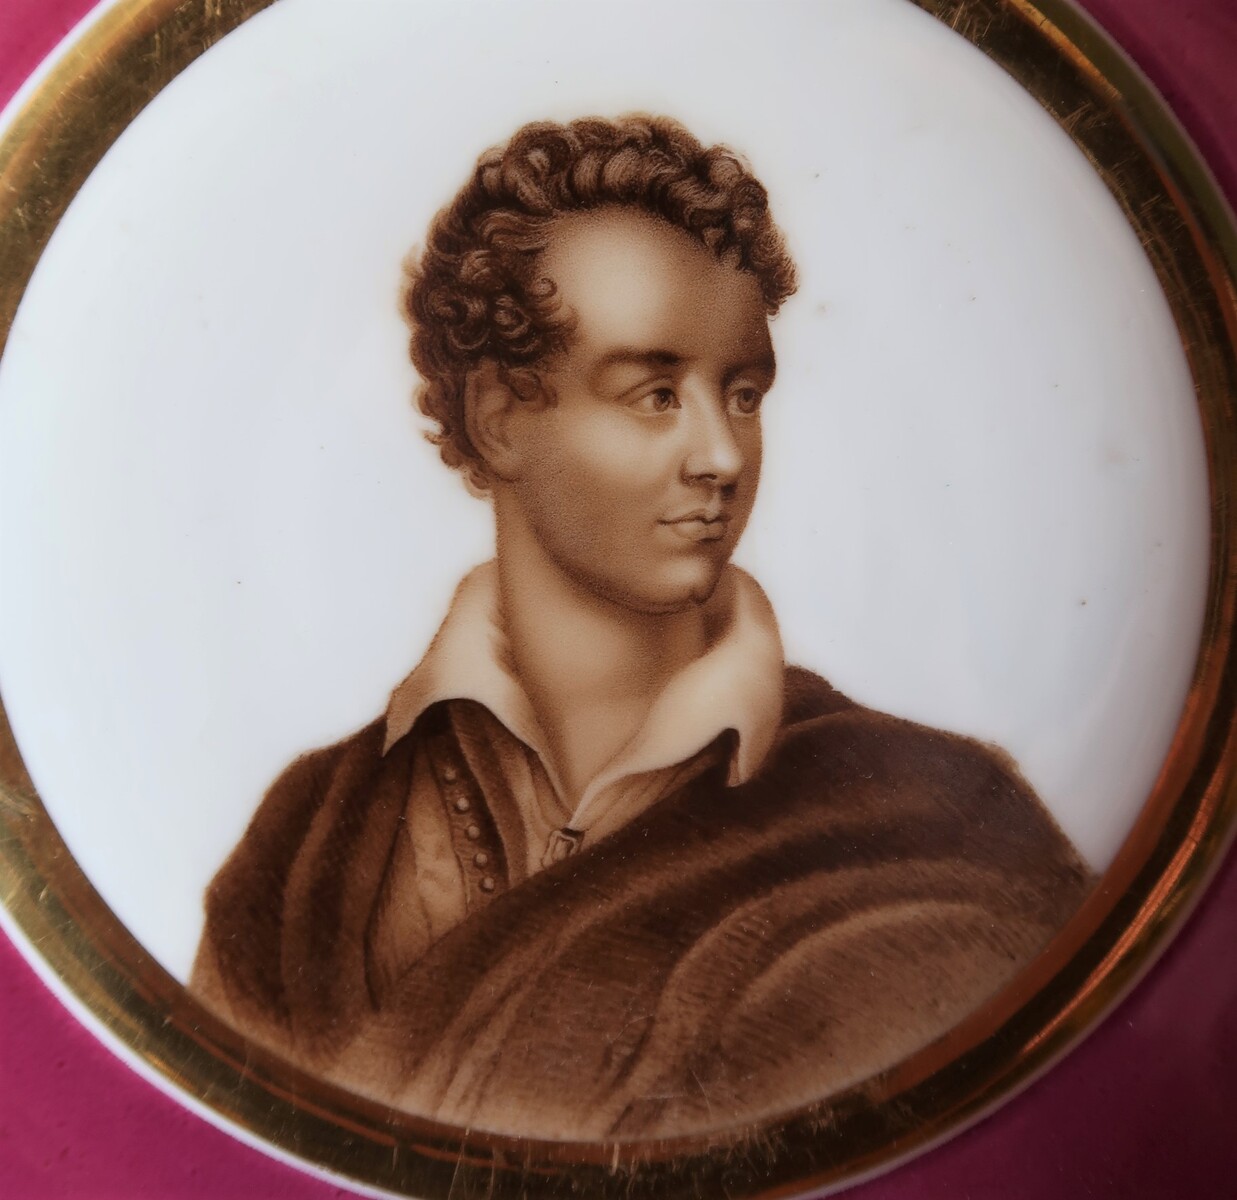 Plate with a portrait of Lord Byron